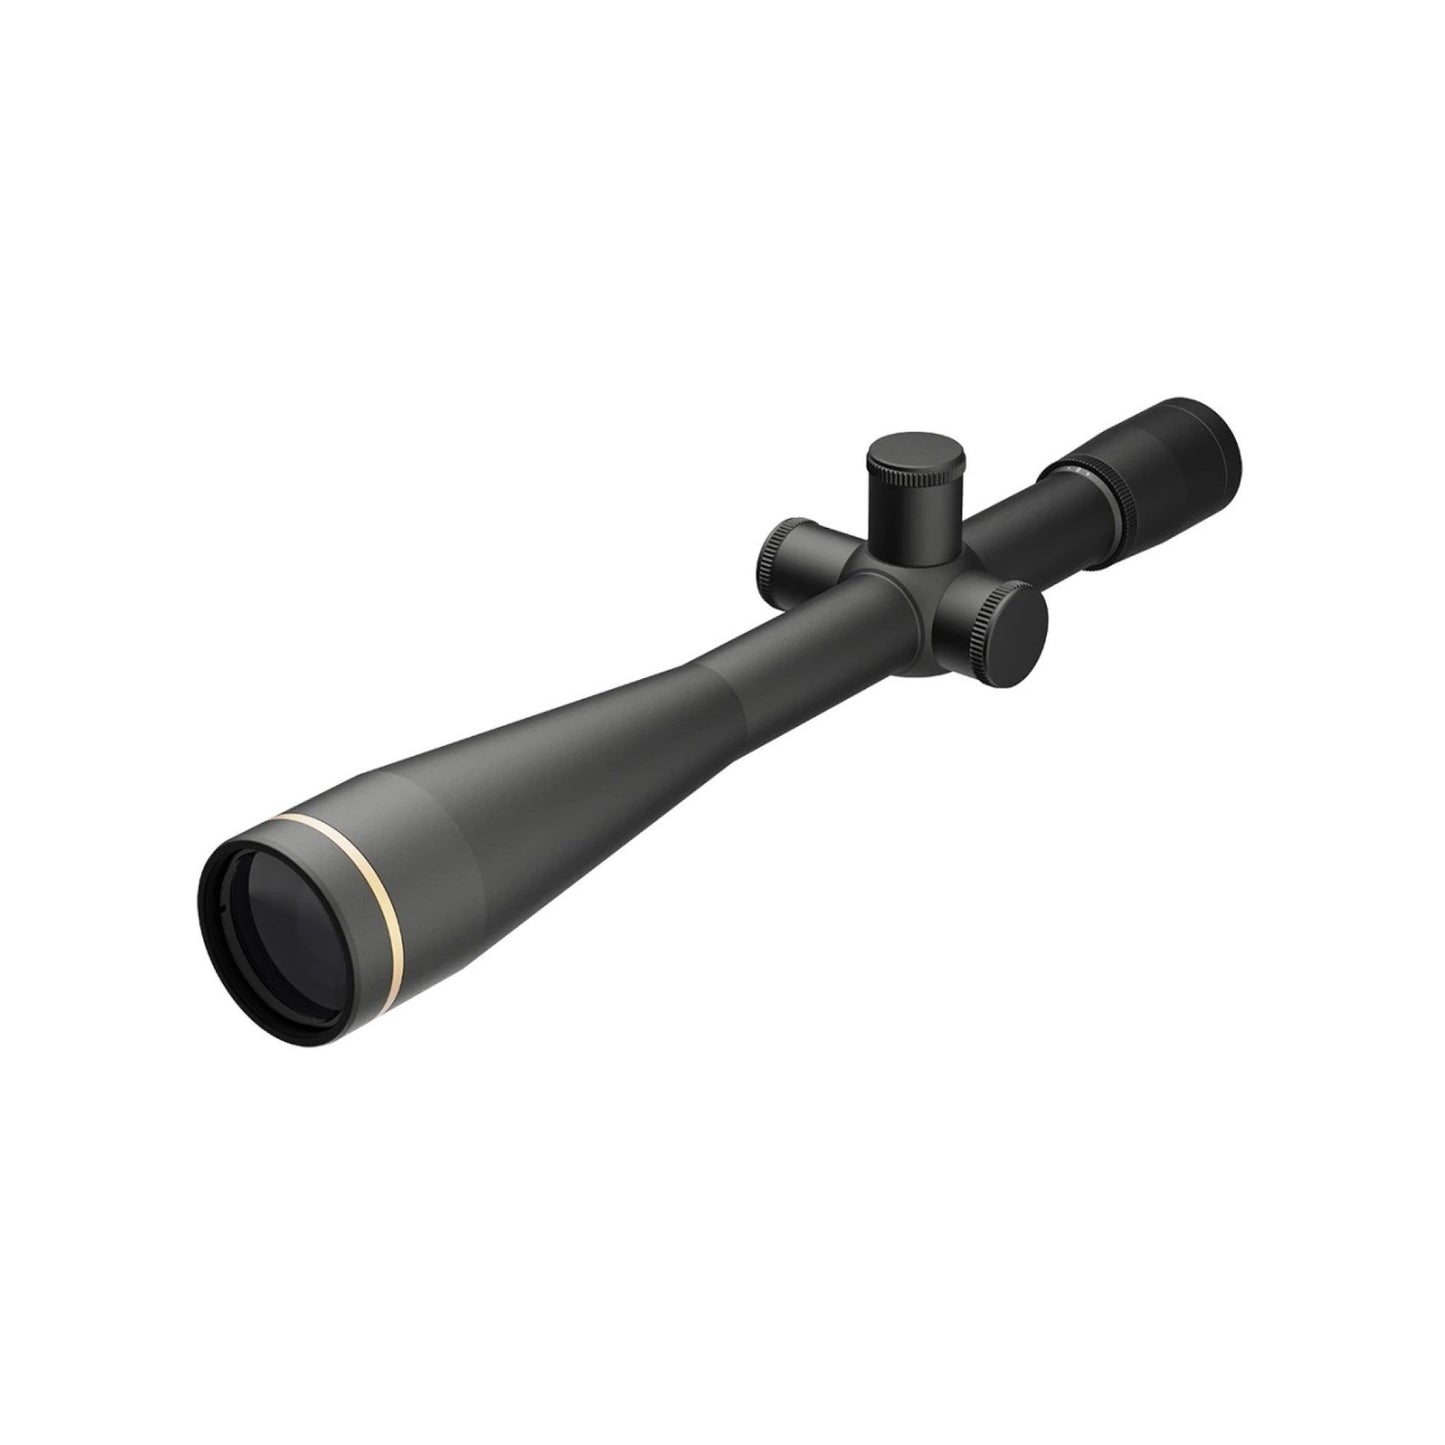 Leupold Competition Series Rifle Scope 45X45mm 1/8 MIN. Target Dot Reticle